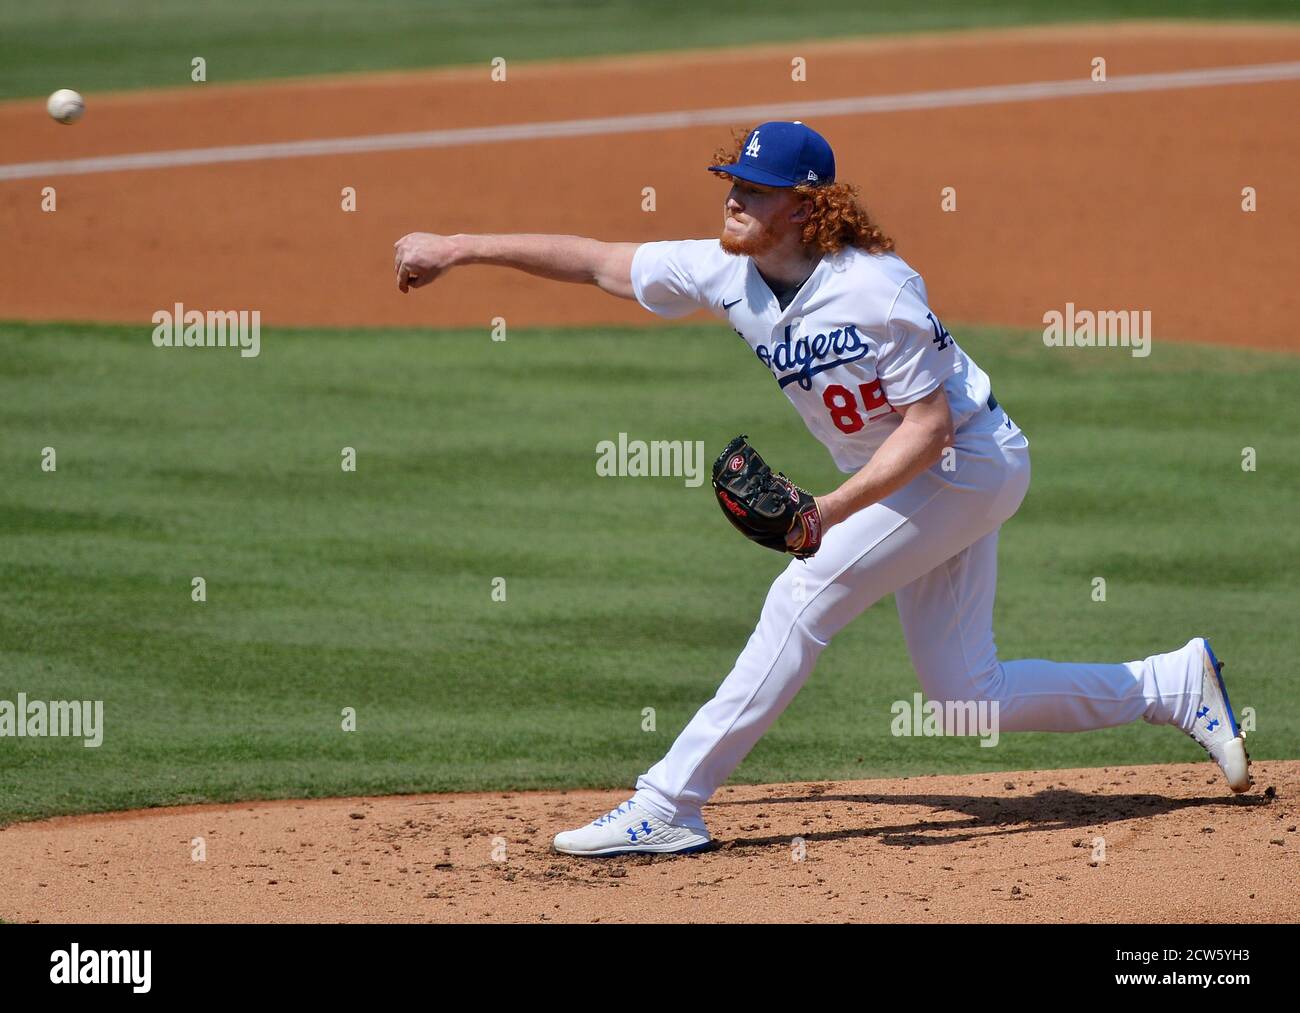 Los Angeles, United States. 27th Sep, 2020. Los Angeles Dodgers' pitcher Dustin May delivers in the third inning against the Los Angeles Angels at Dodger Stadium in Los Angeles on Sunday, September 27, 2020. The club had Dustin May and Julio Ur'as pitch bulk innings out of the bullpen after relievers opened the game for an inning or two down the stretch in preparation for the playoffs. The right-hander tossed four scoreless innings with five strikeouts, allowing two hits and walked two. Photo by Jim Ruymen/UPI Credit: UPI/Alamy Live News Stock Photo